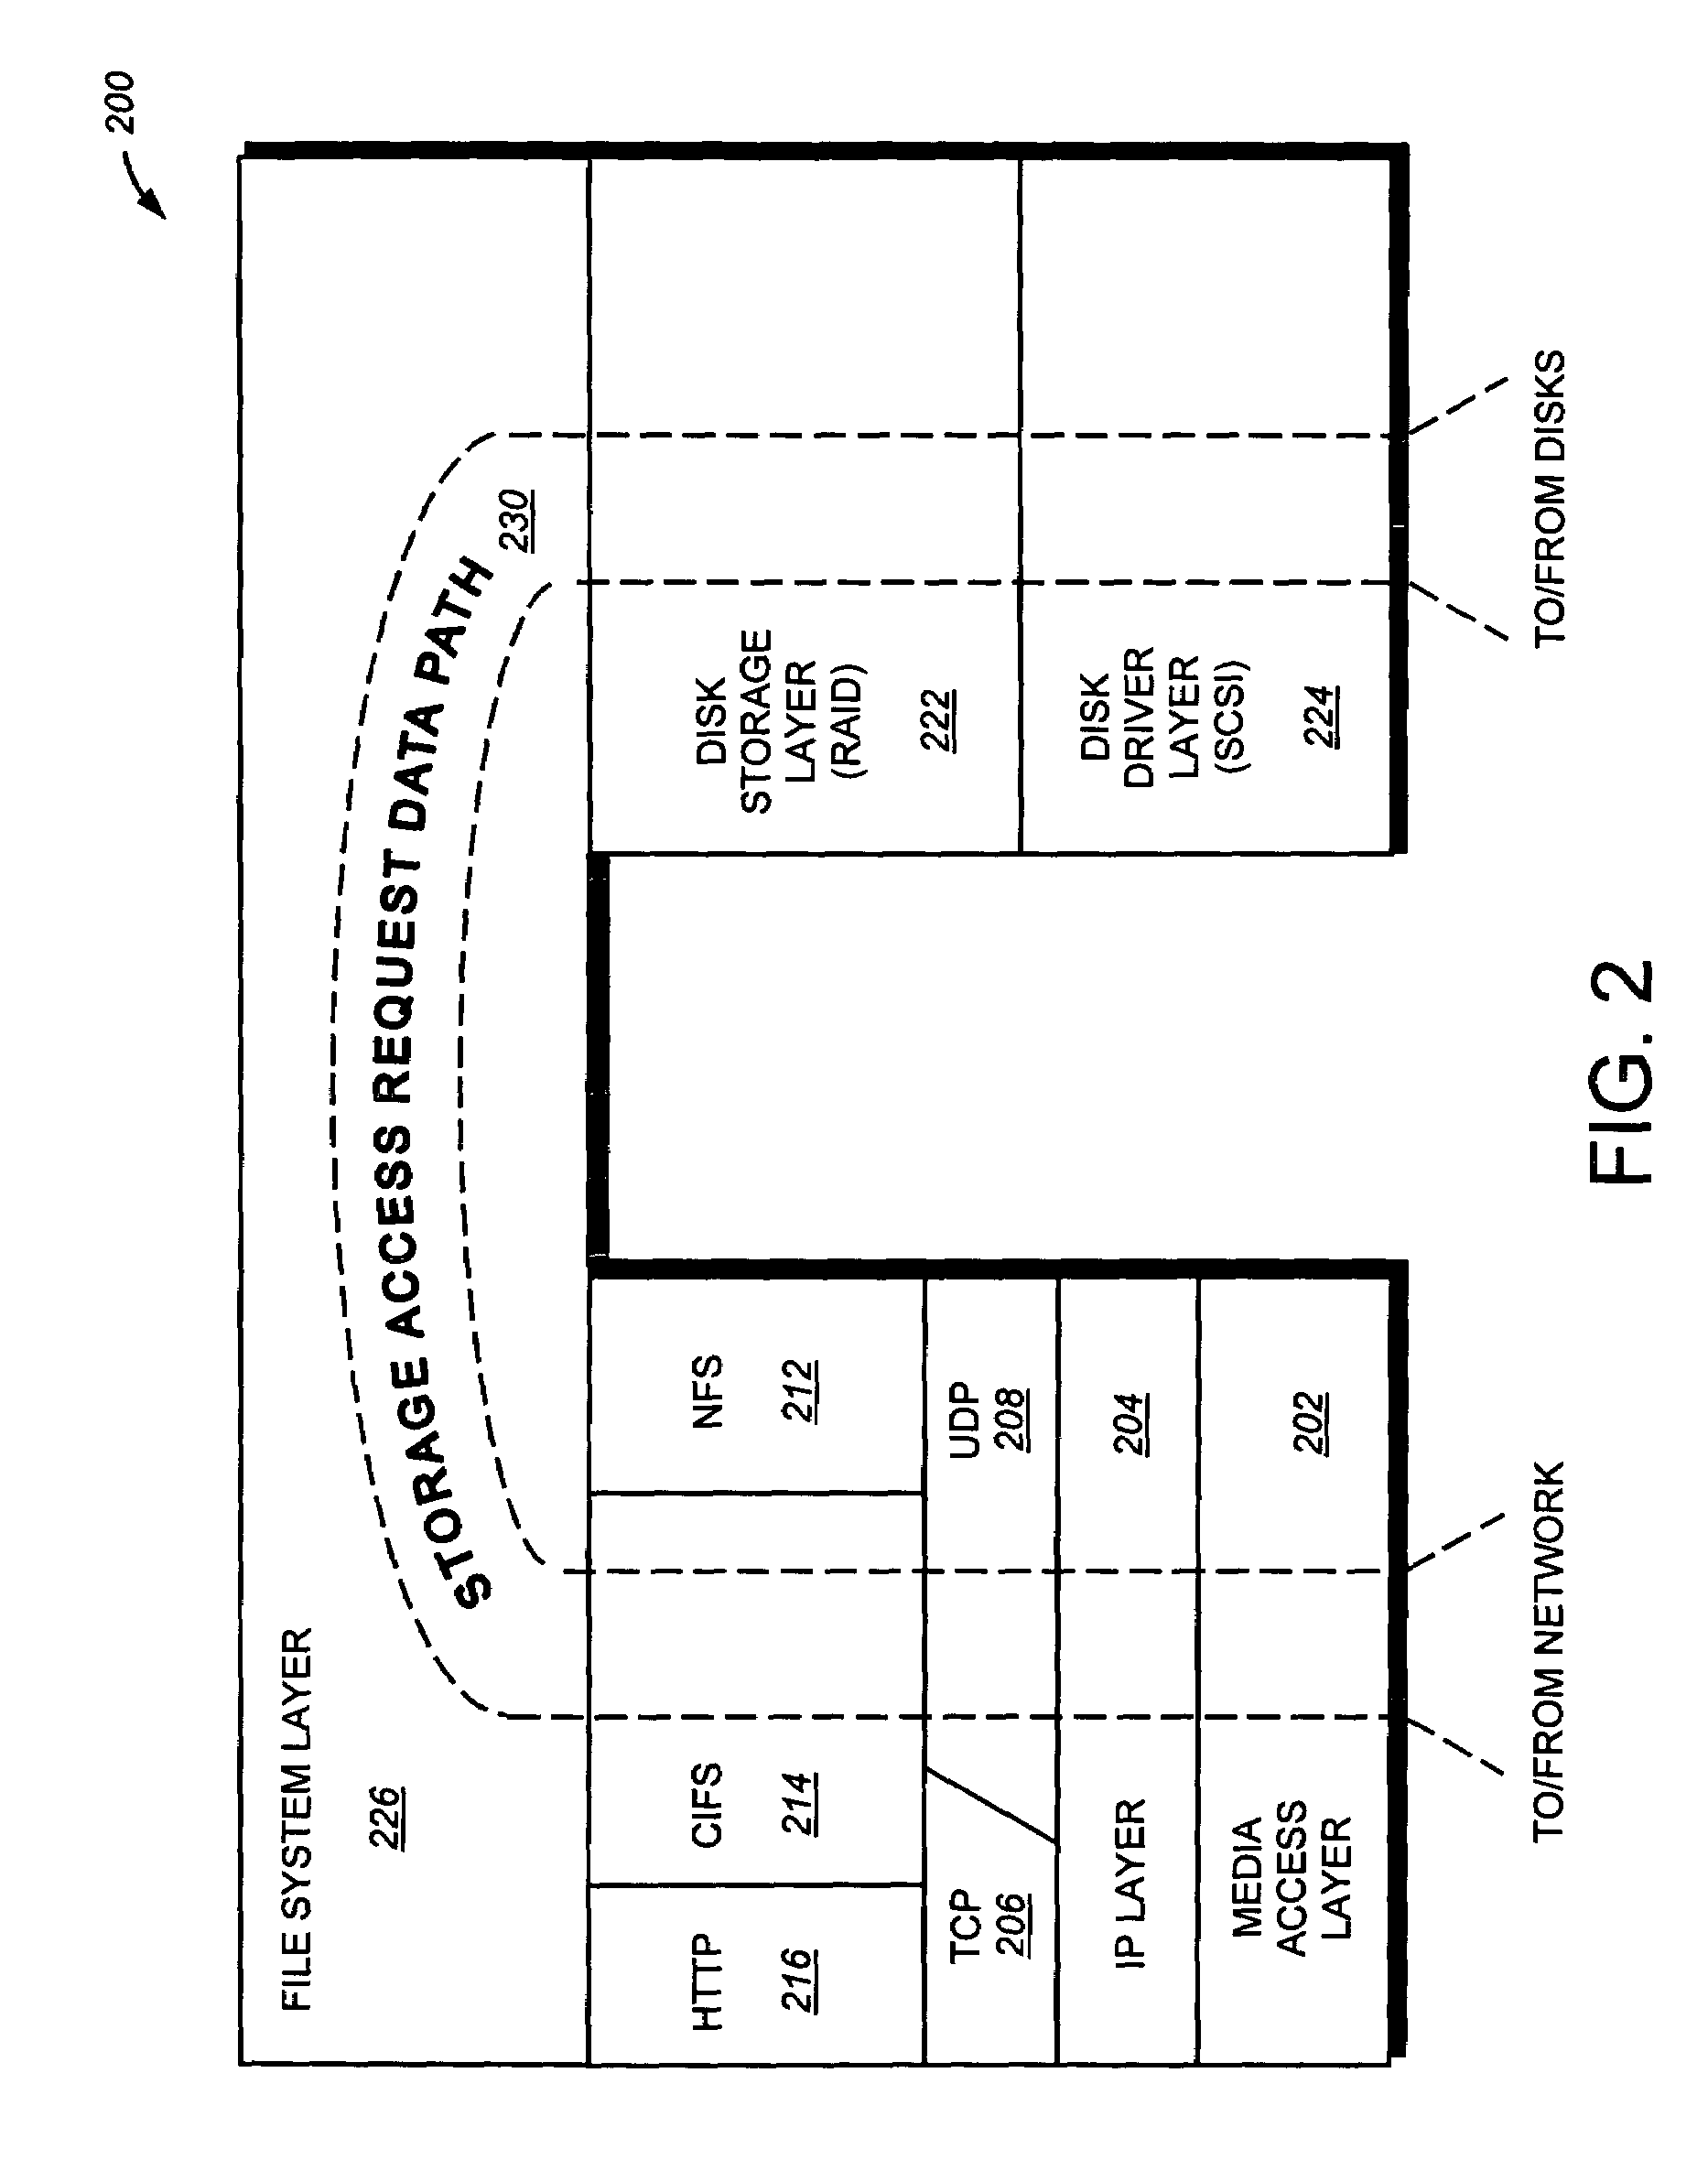 System and method for emulating SCSI reservations using network file access protocols